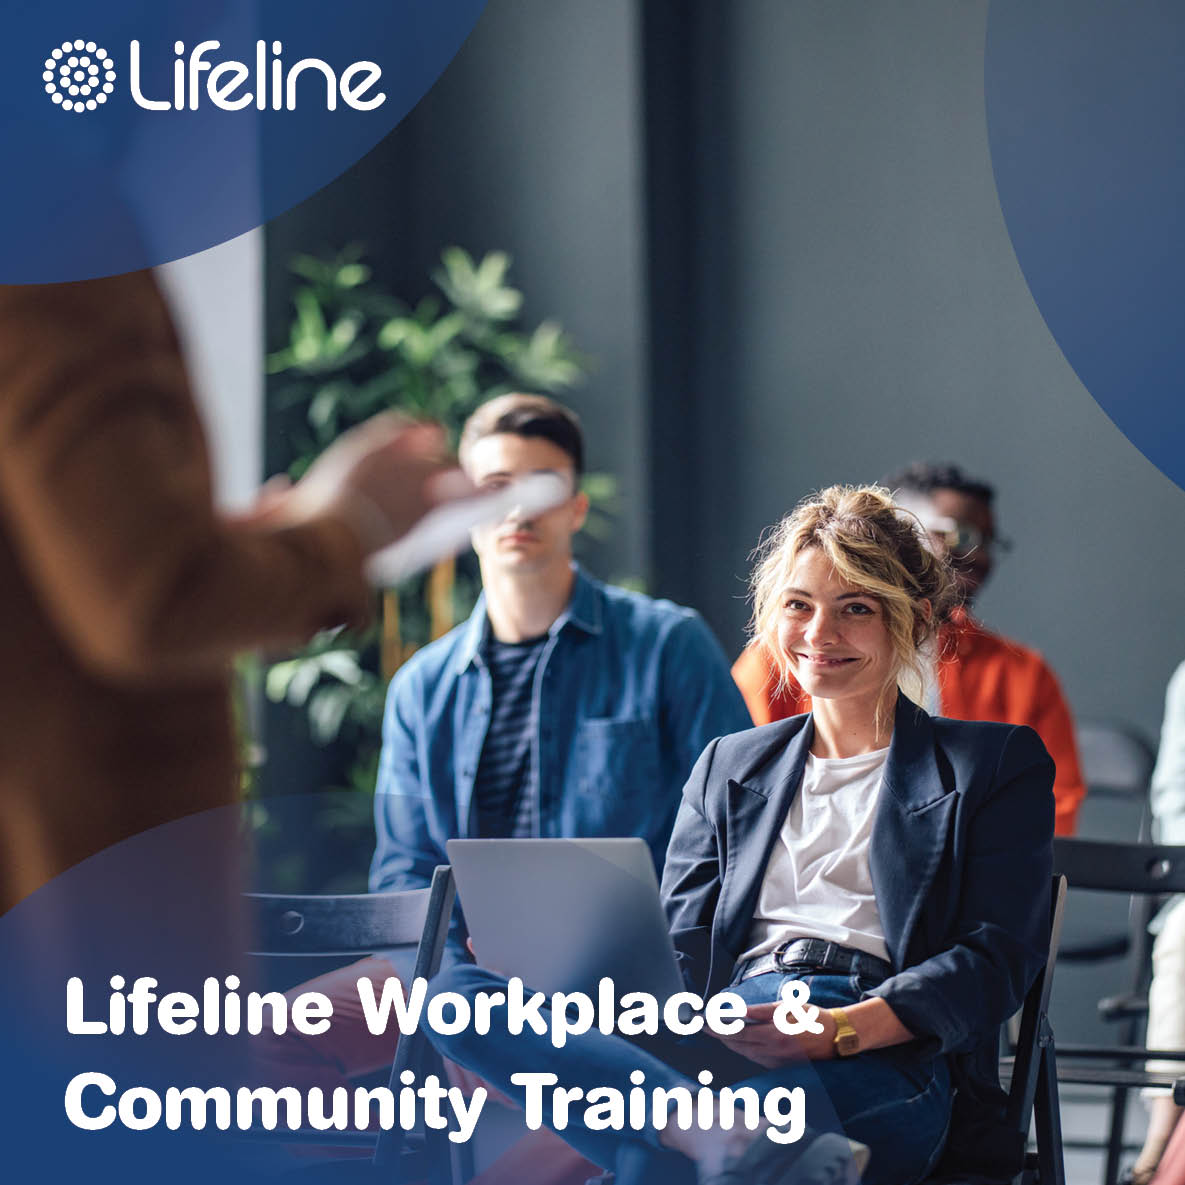 Lifeline Workplace and Community Training offer a range of programs (instructor-led and self-led) that build resilience in people, organisations, and communities. lifeline.org.au/get-involved/w…